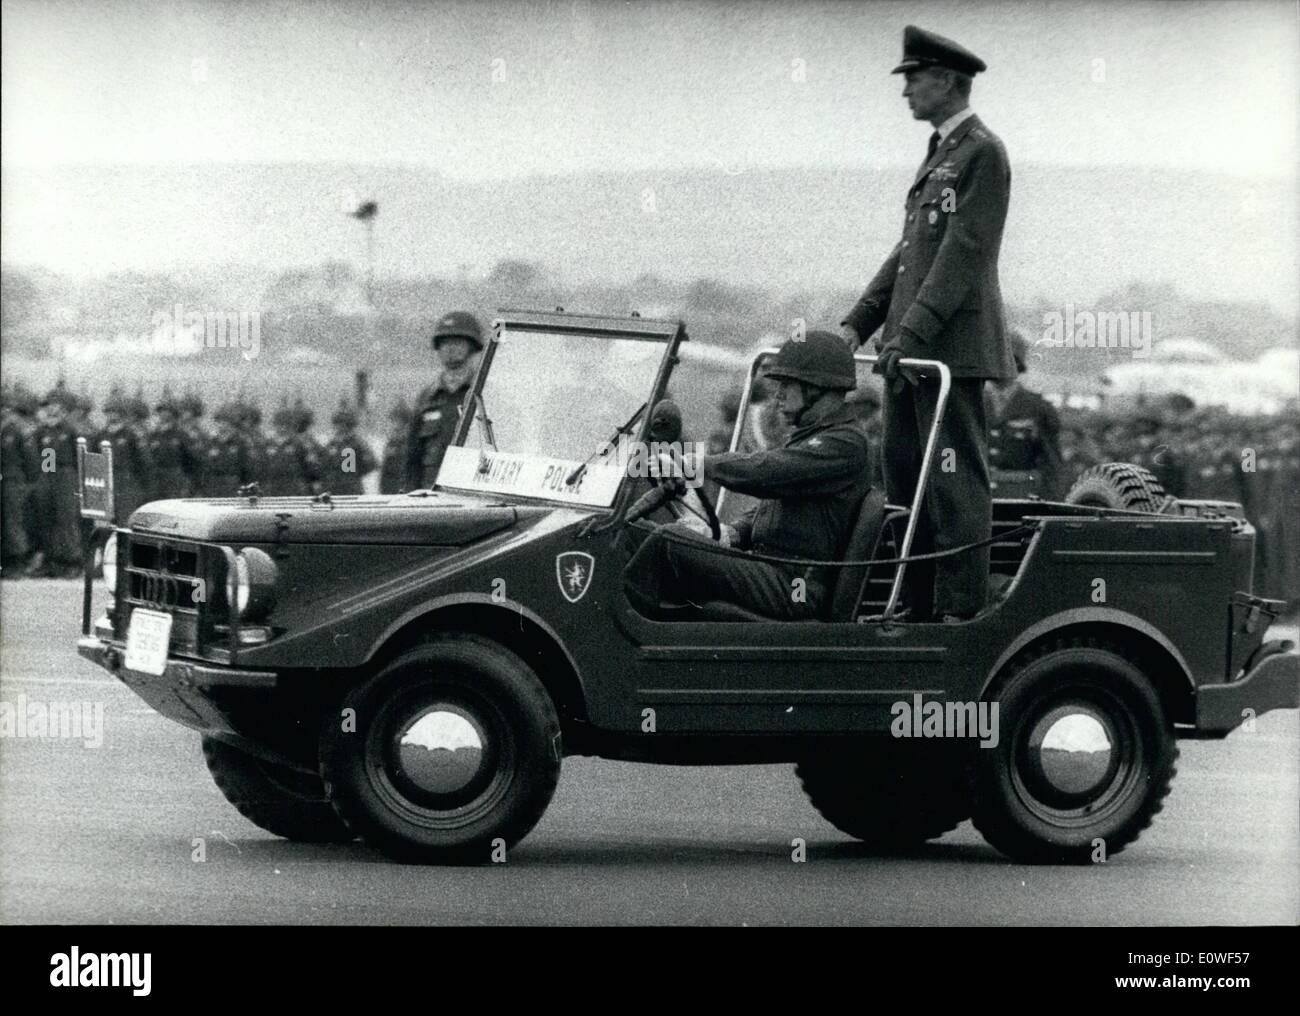 Oct. 10, 1962 - Farewell Parade for General Norstad: Troops from Canada, France, the USA and Germany participated in the farewell parade for the retiring NATO Supreme Commander General Lauris Norstad held on Wiesbaden Air Base today. Photo shows General Norstad on his reviewing jeep trooping the line of troops. Stock Photo